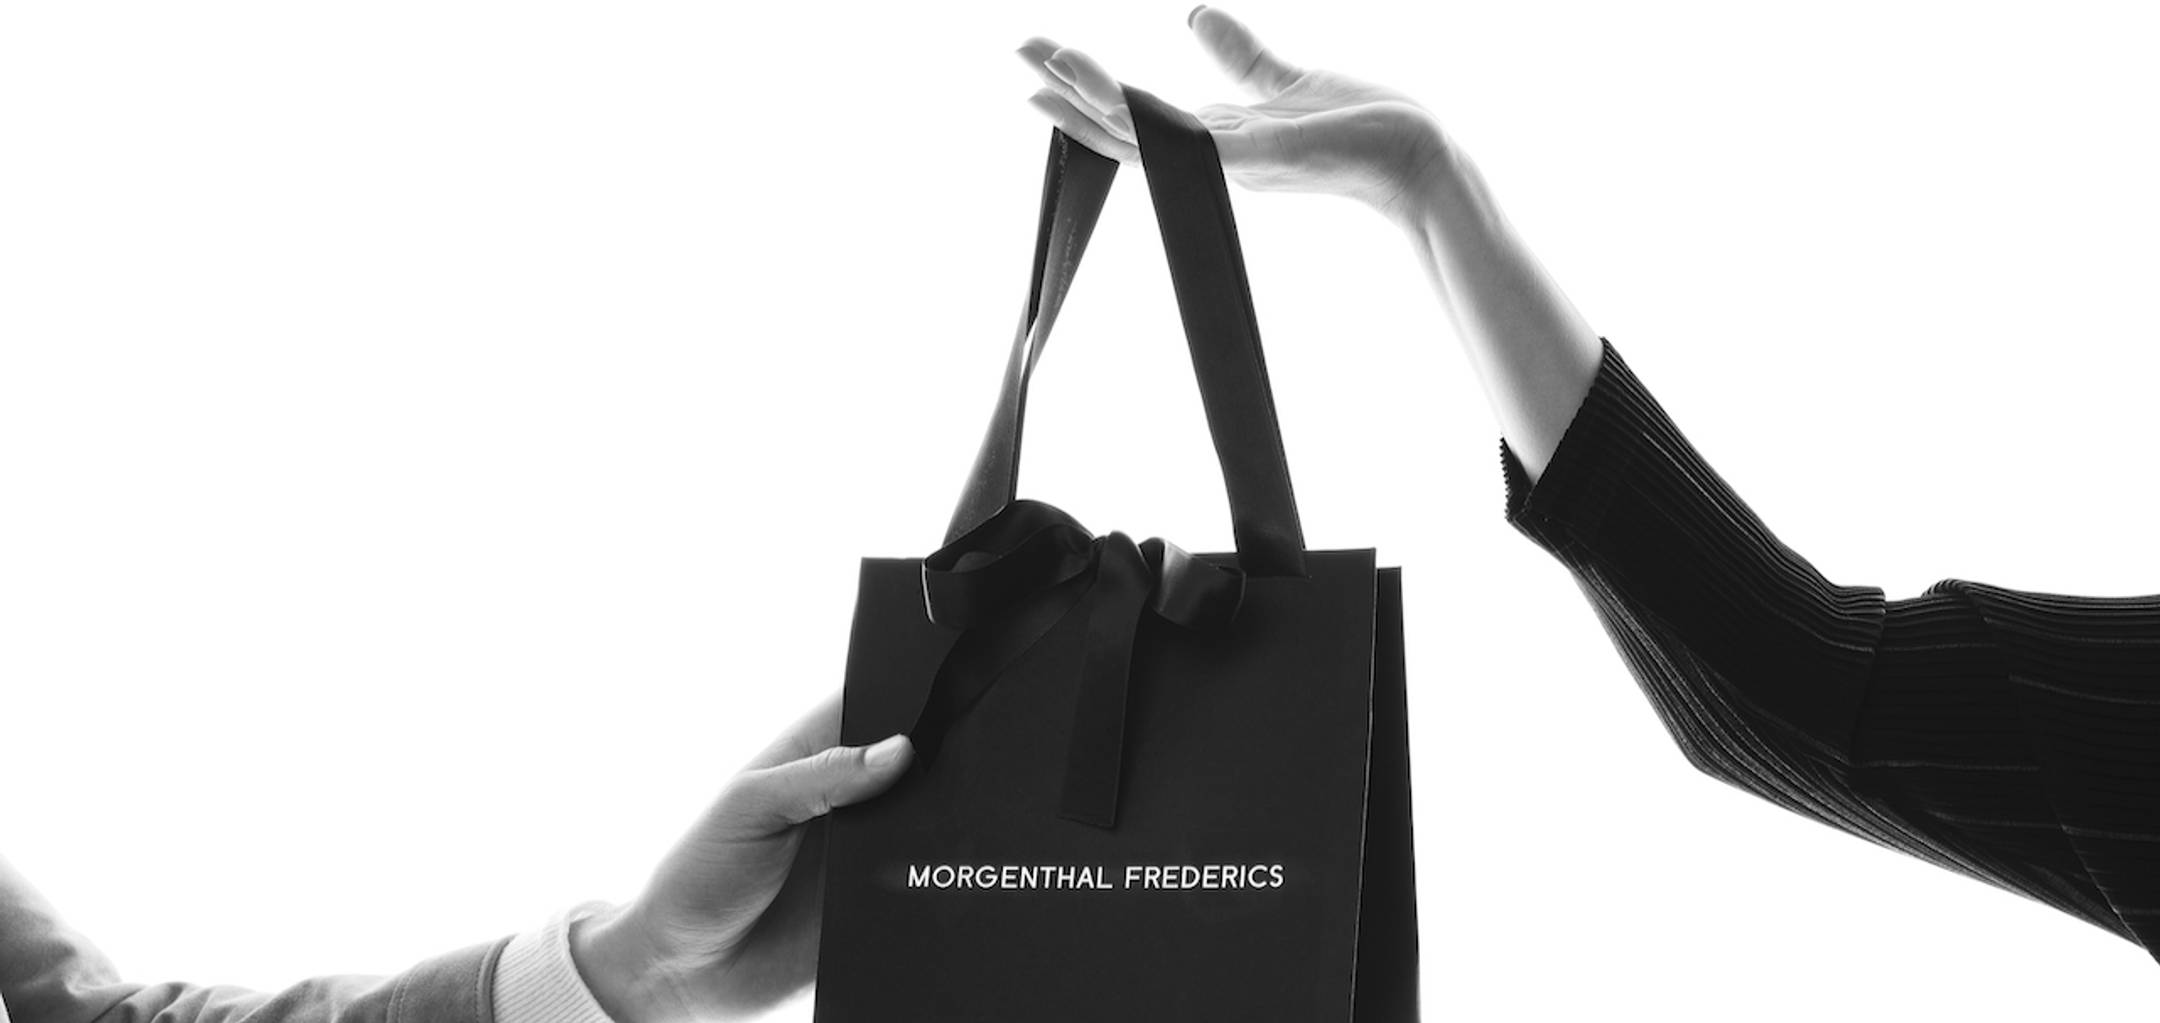 Store clerk handing a Morgenthal Frederics shopping bag to customer